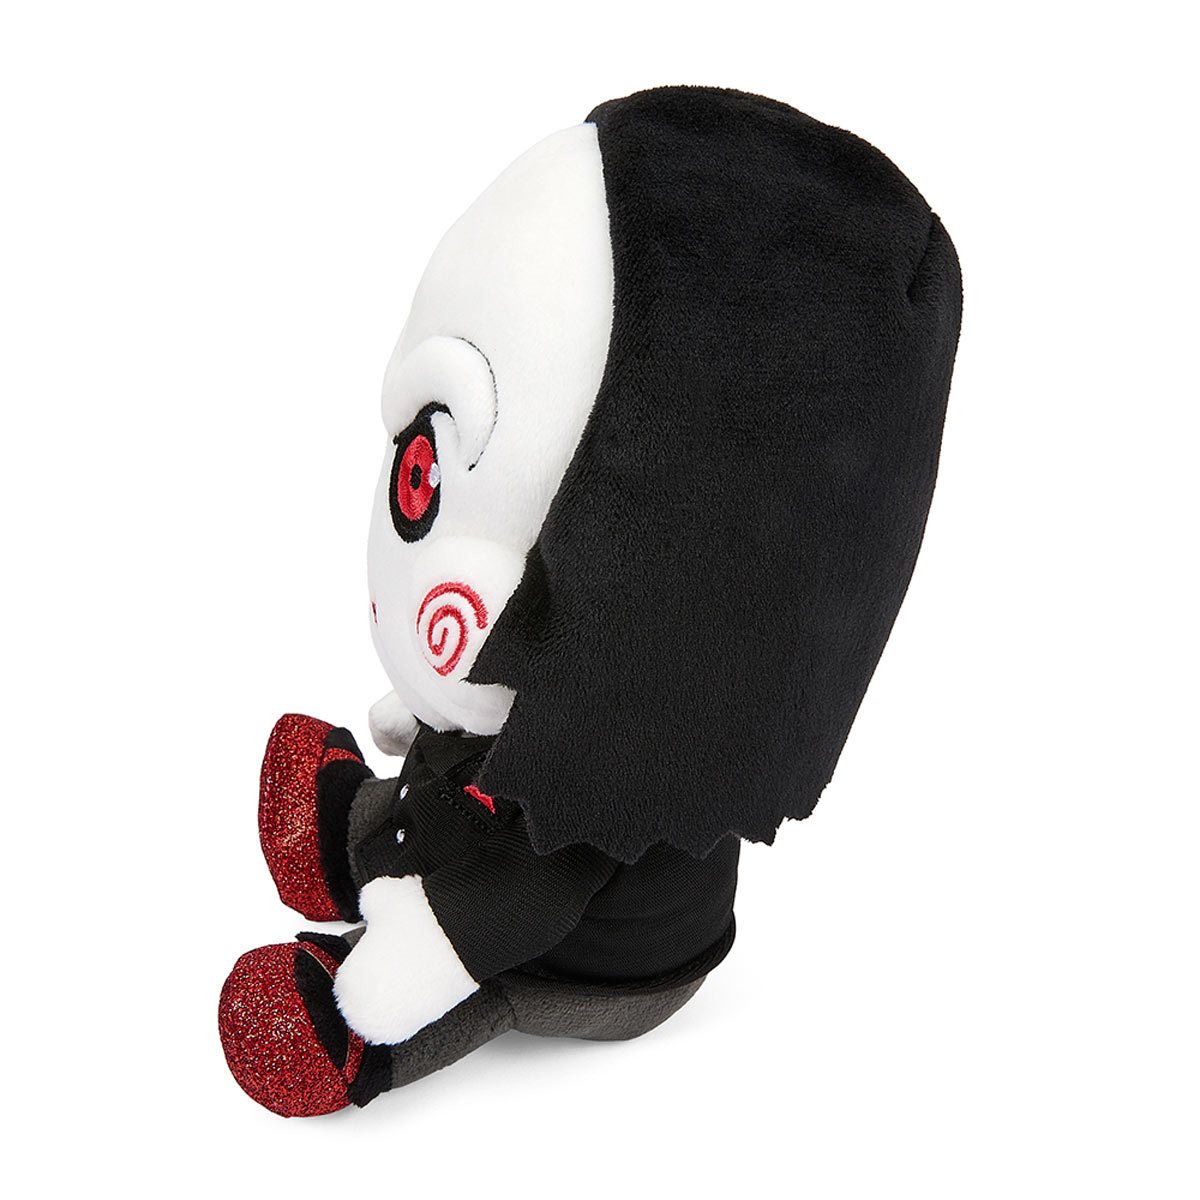 Ghost Face - Glow in The Dark - 8 Roto Phunny Plush